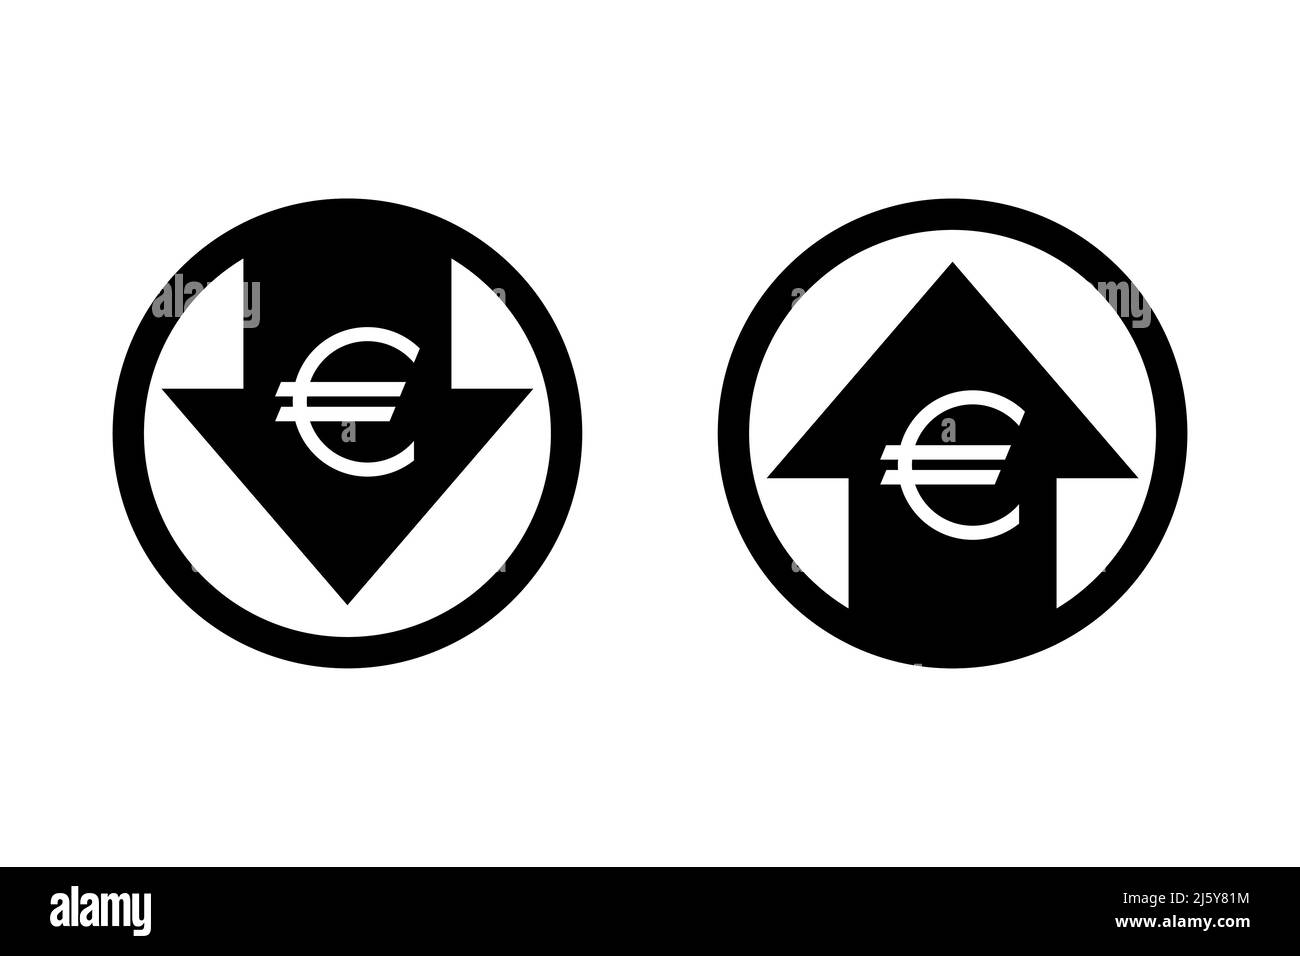 Euro up and down icon set Stock Vector